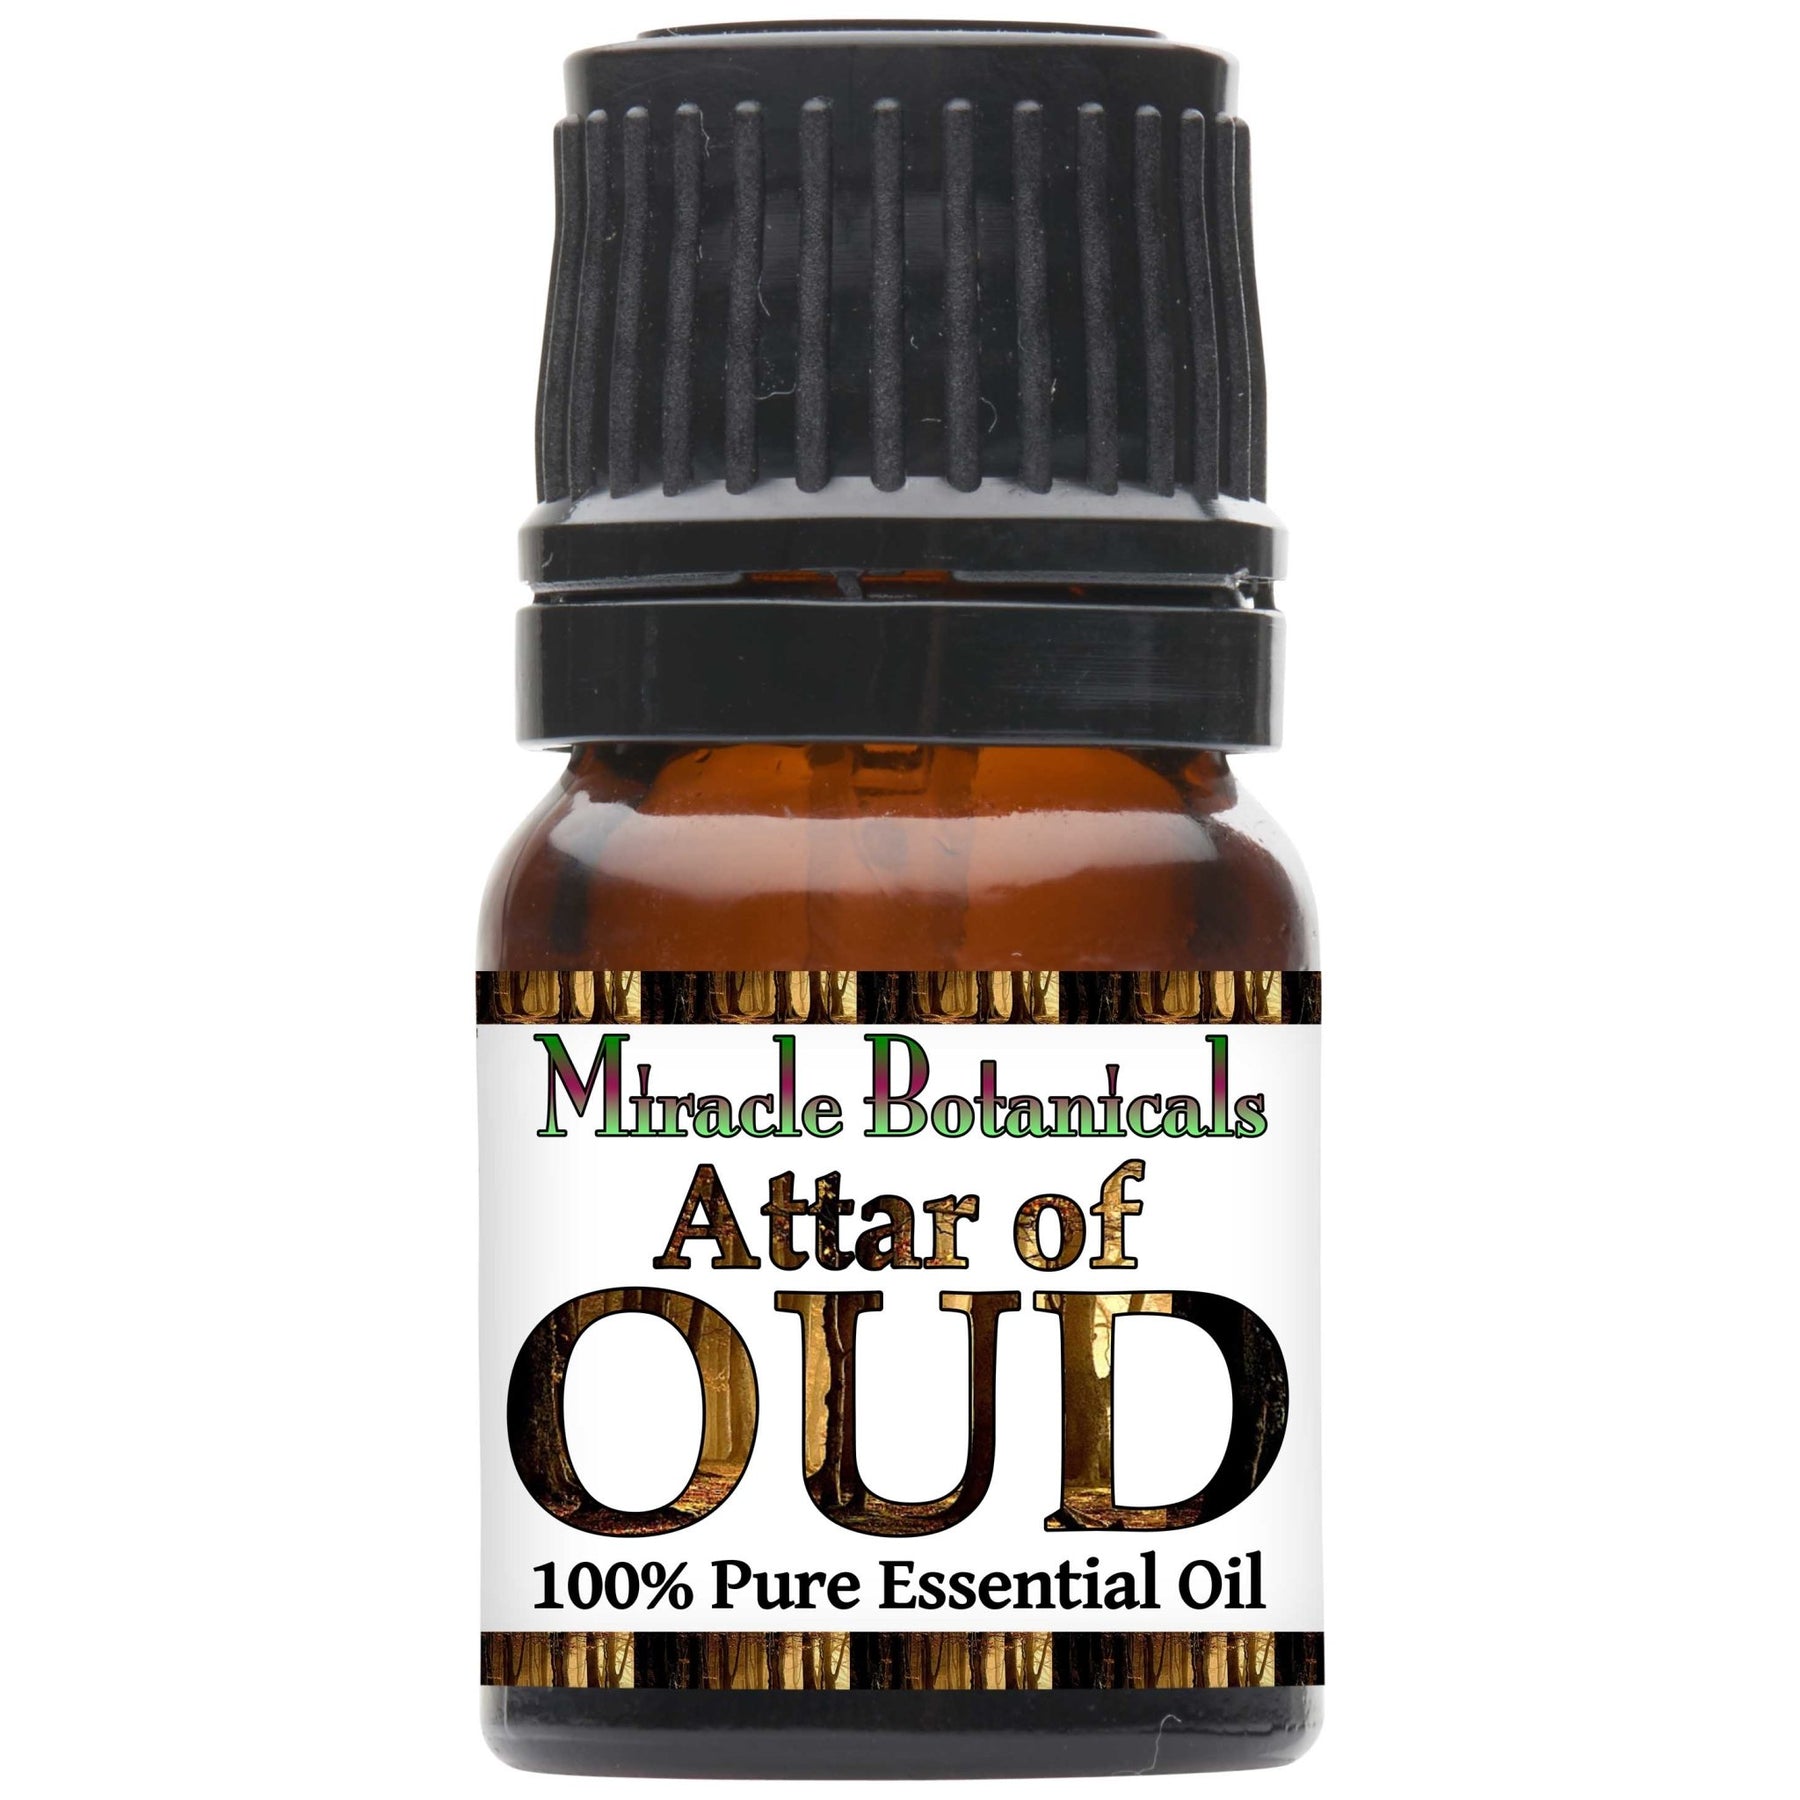 Cambodian Oud Essential Oil from